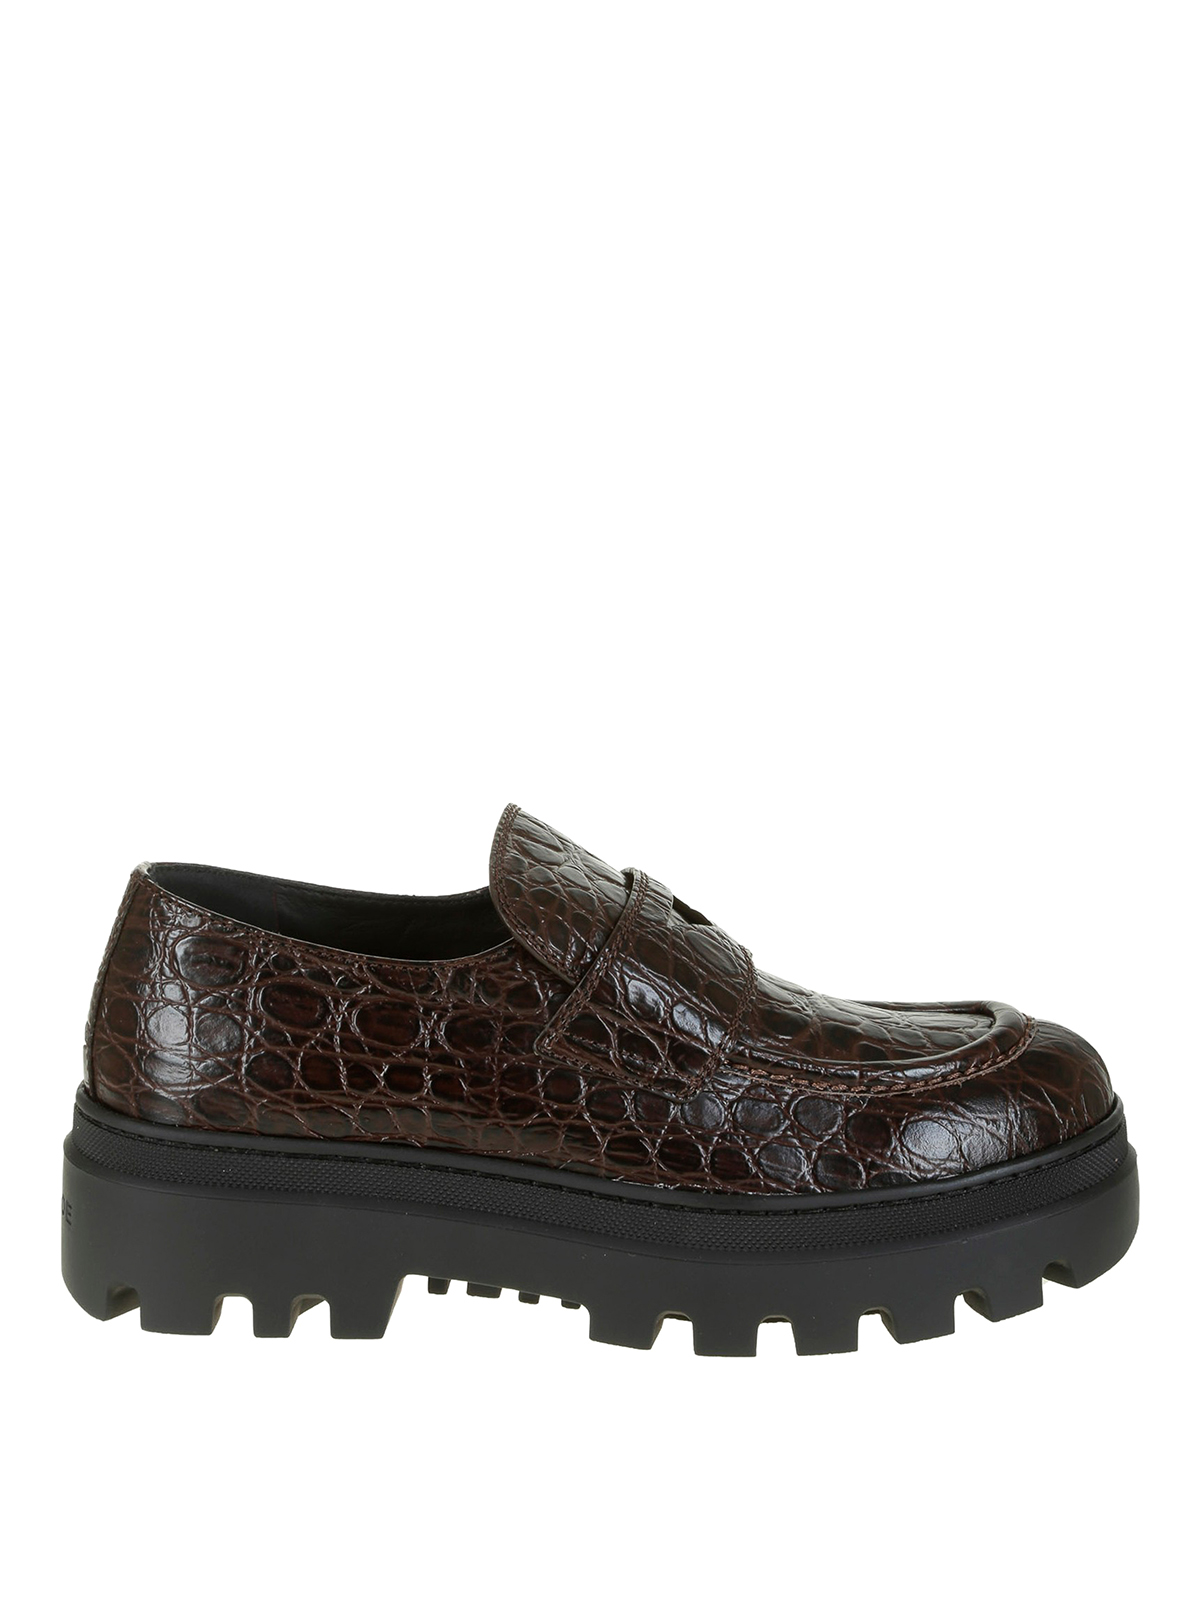 Car Shoe Leather Loafers In Marrón Oscuro